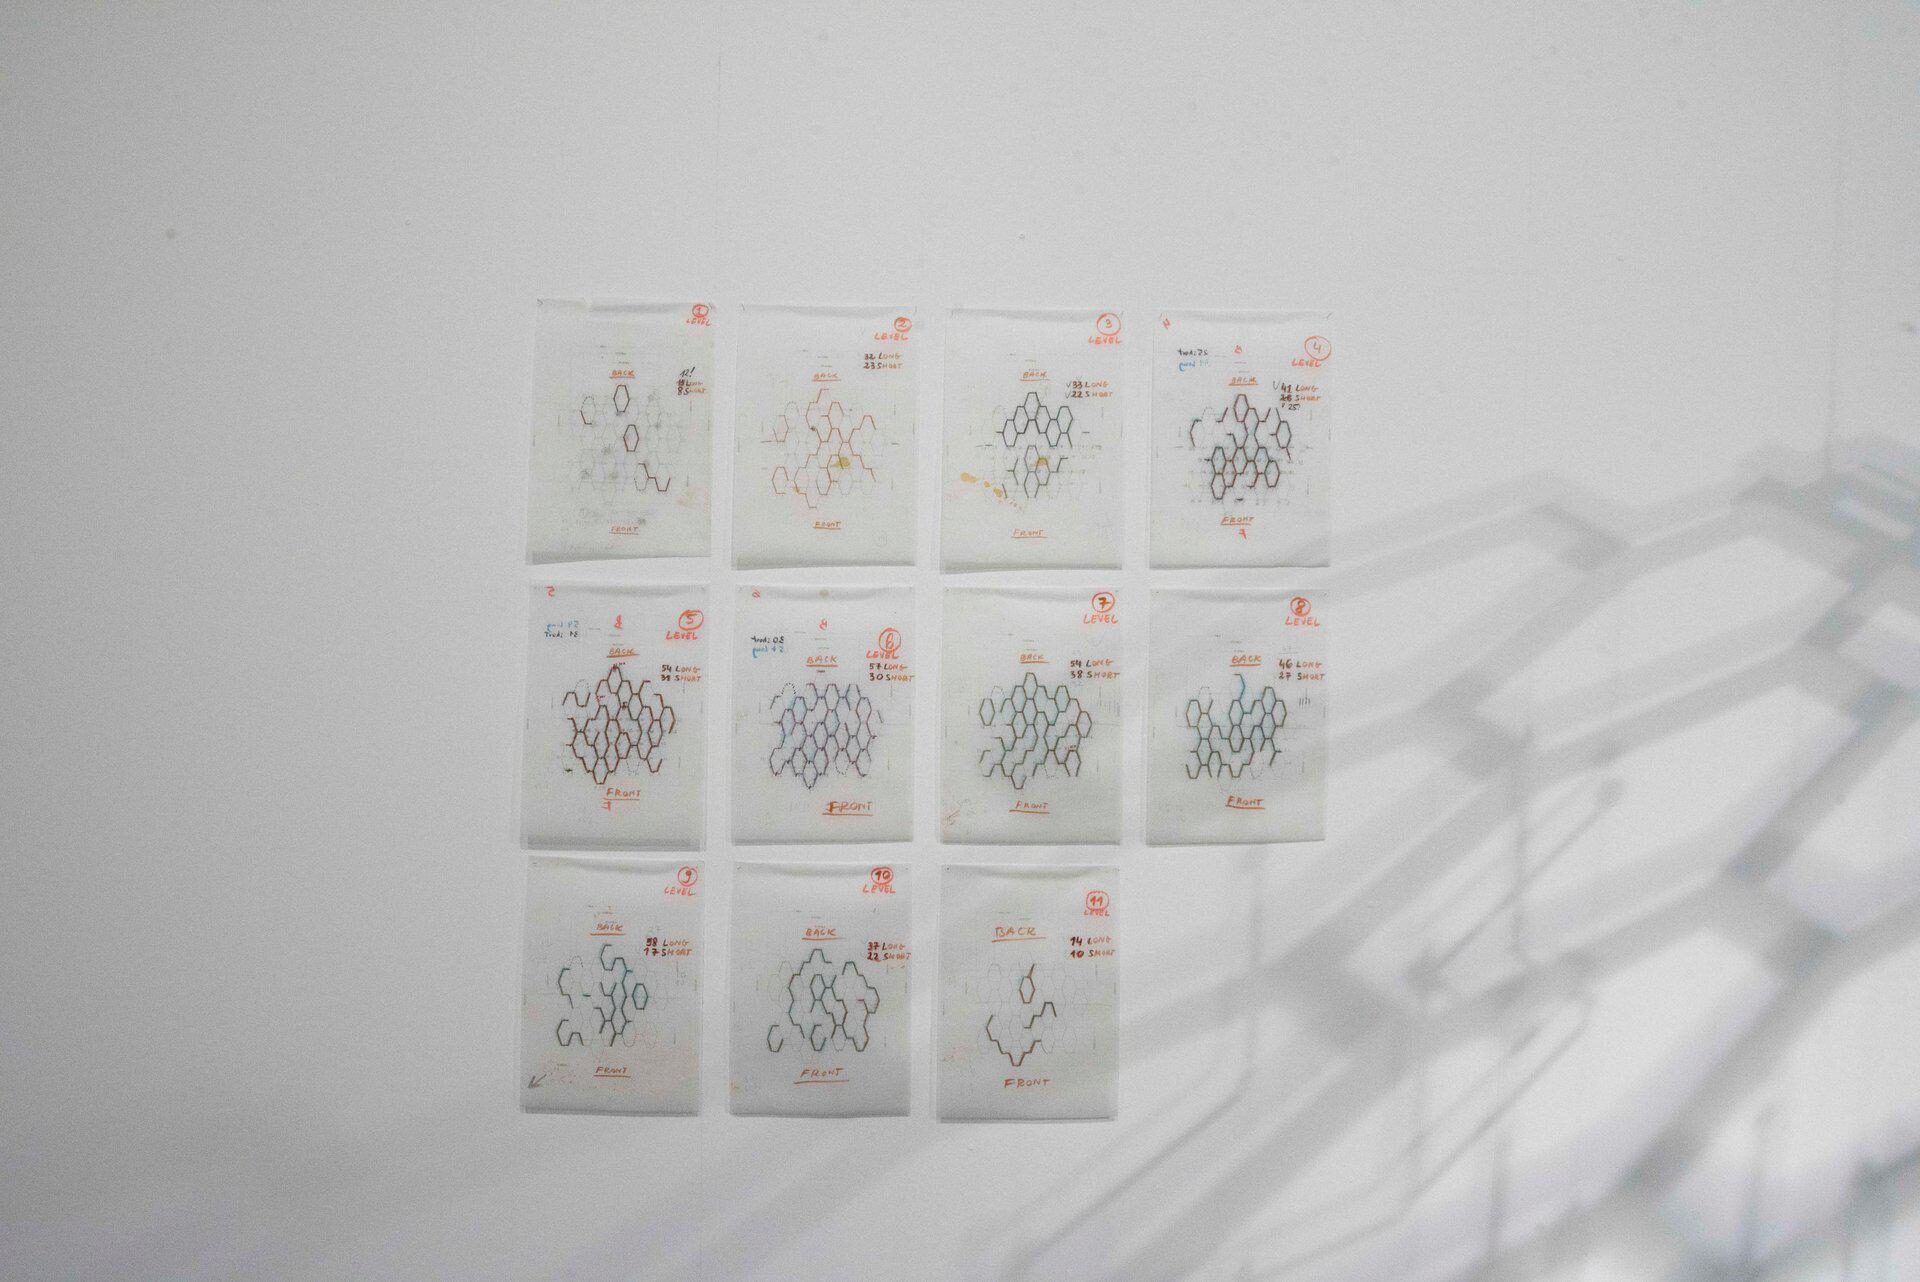 Iza Tarasewicz, Sketches ONCE INFORMATION HAS PASSED INTO PROTEIN, 2017